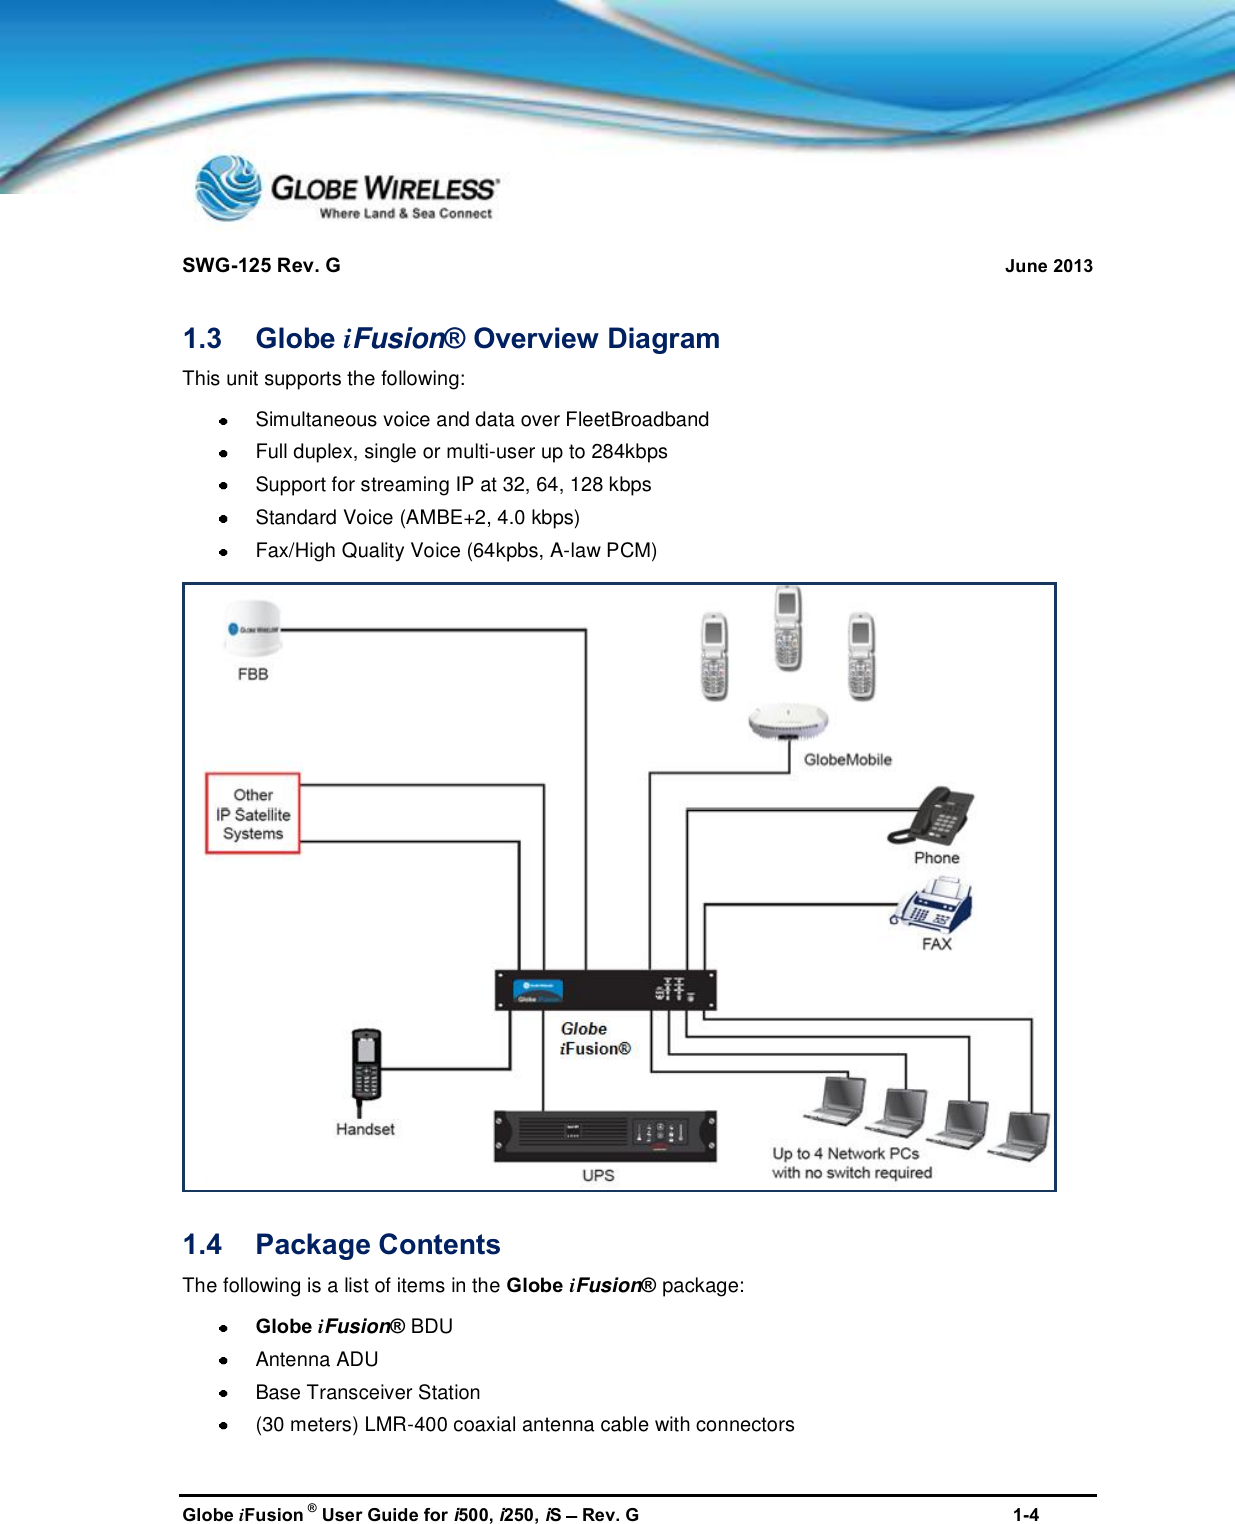 SWG-125 Rev. G June 2013Globe iFusion ®User Guide for i500, i250, iSRev. G 1-41.3 Globe iFusion® Overview DiagramThis unit supports the following:Simultaneous voice and data over FleetBroadbandFull duplex, single or multi-user up to 284kbpsSupport for streaming IP at 32, 64, 128 kbpsStandard Voice (AMBE+2, 4.0 kbps)Fax/High Quality Voice (64kpbs, A-law PCM)1.4 Package ContentsThe following is a list of items in the Globe iFusion®package:Globe iFusion®BDUAntenna ADUBase Transceiver Station(30 meters) LMR-400 coaxial antenna cable with connectors